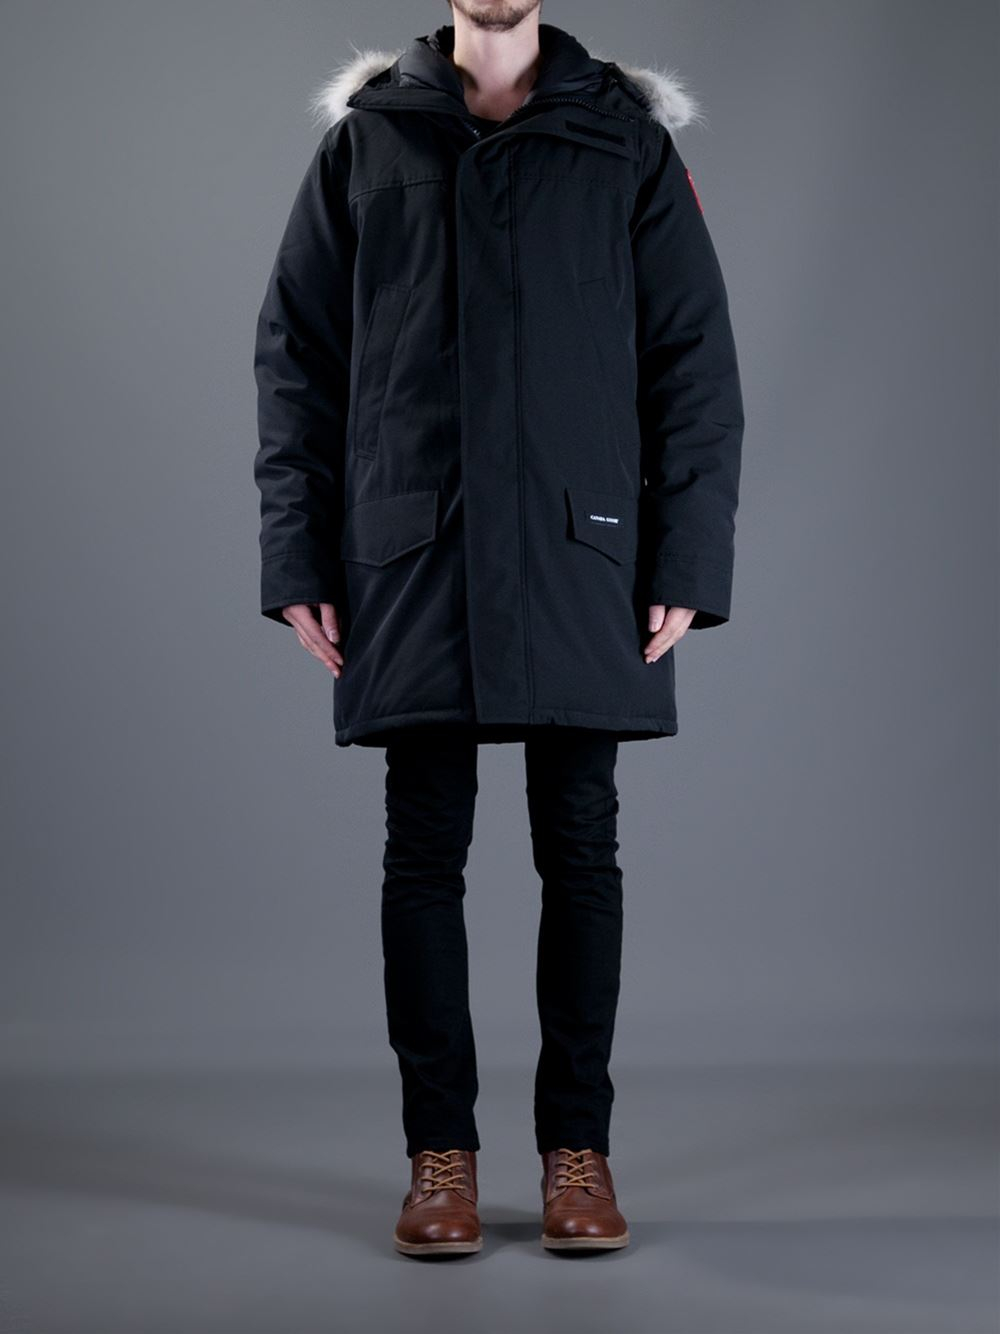 Canada Goose jackets online cheap - Canada goose 'Langford' Parka in Black for Men | Lyst